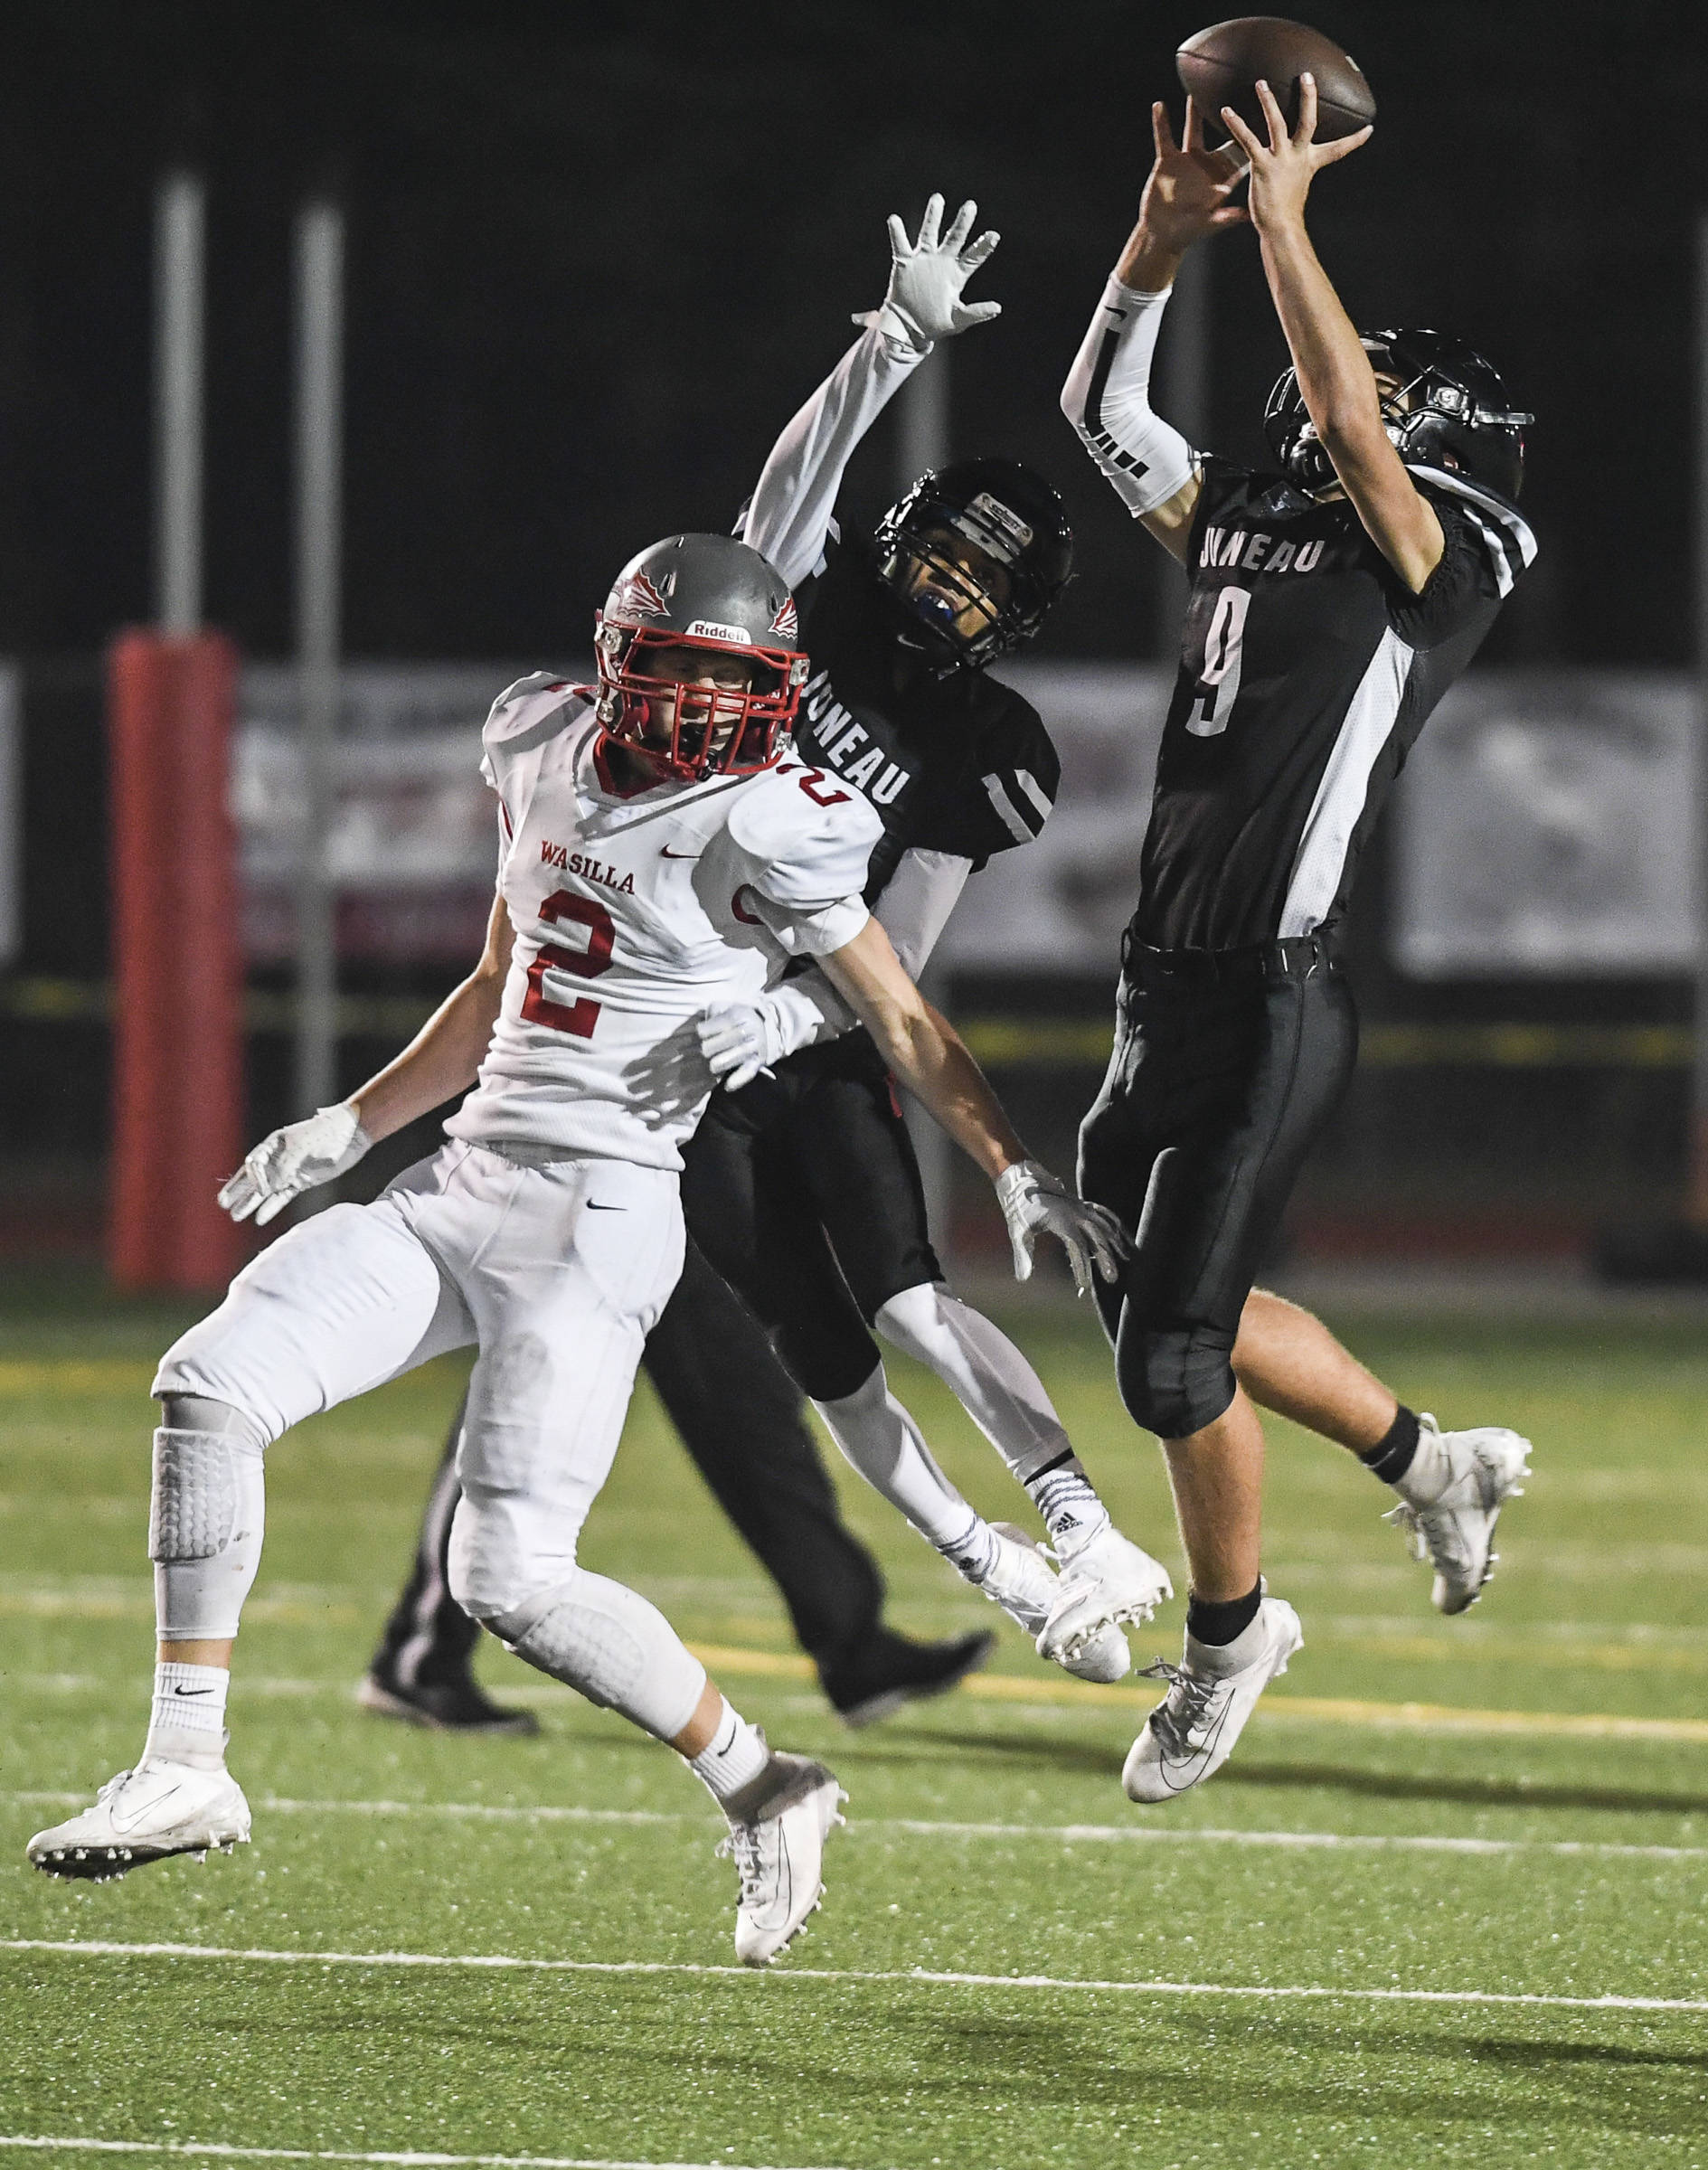 Juneau’s Wallace Adams, right, intercepts a pass intended for Wasilla’s Luke Devine, left, in the third quarter at Adair-Kennedy Memorial Field on Friday, Sept. 6, 2019. Juneau’s Jahrease Mays, center, was also in on the play. Juneau won 63-0. (Michael Penn | Juneau Empire)